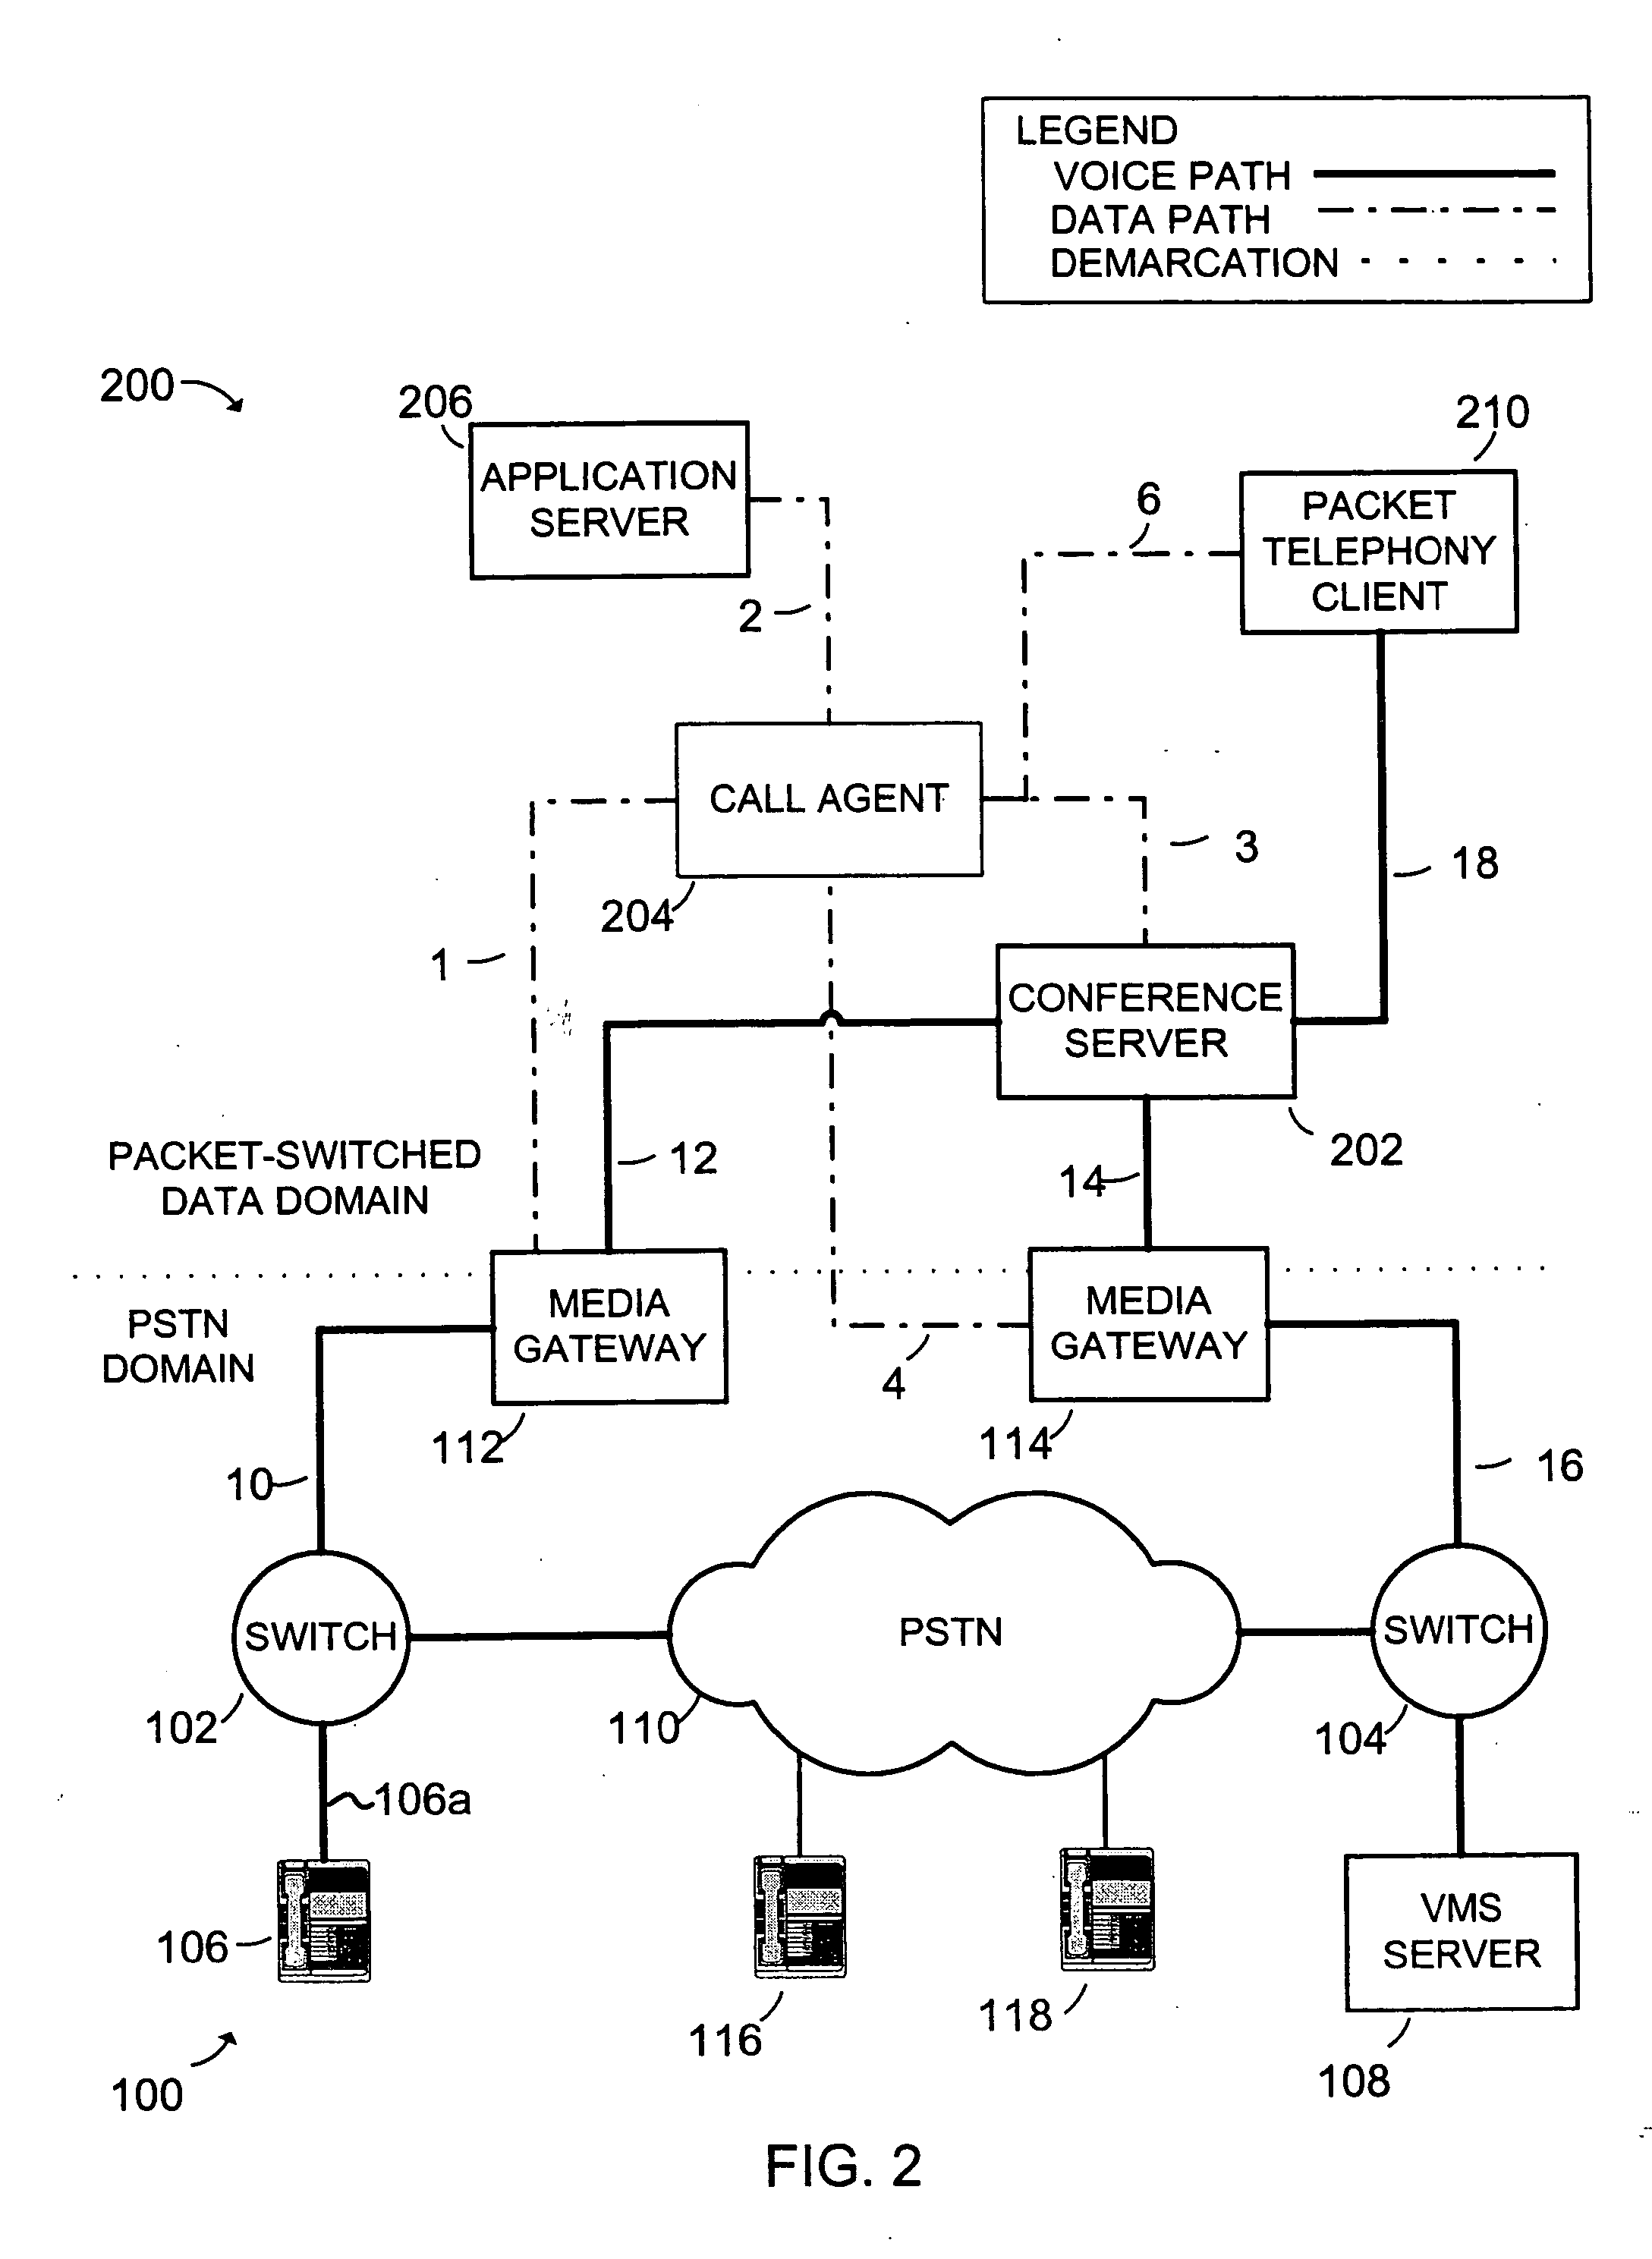 Systems and methods for monitoring network-based voice messaging systems